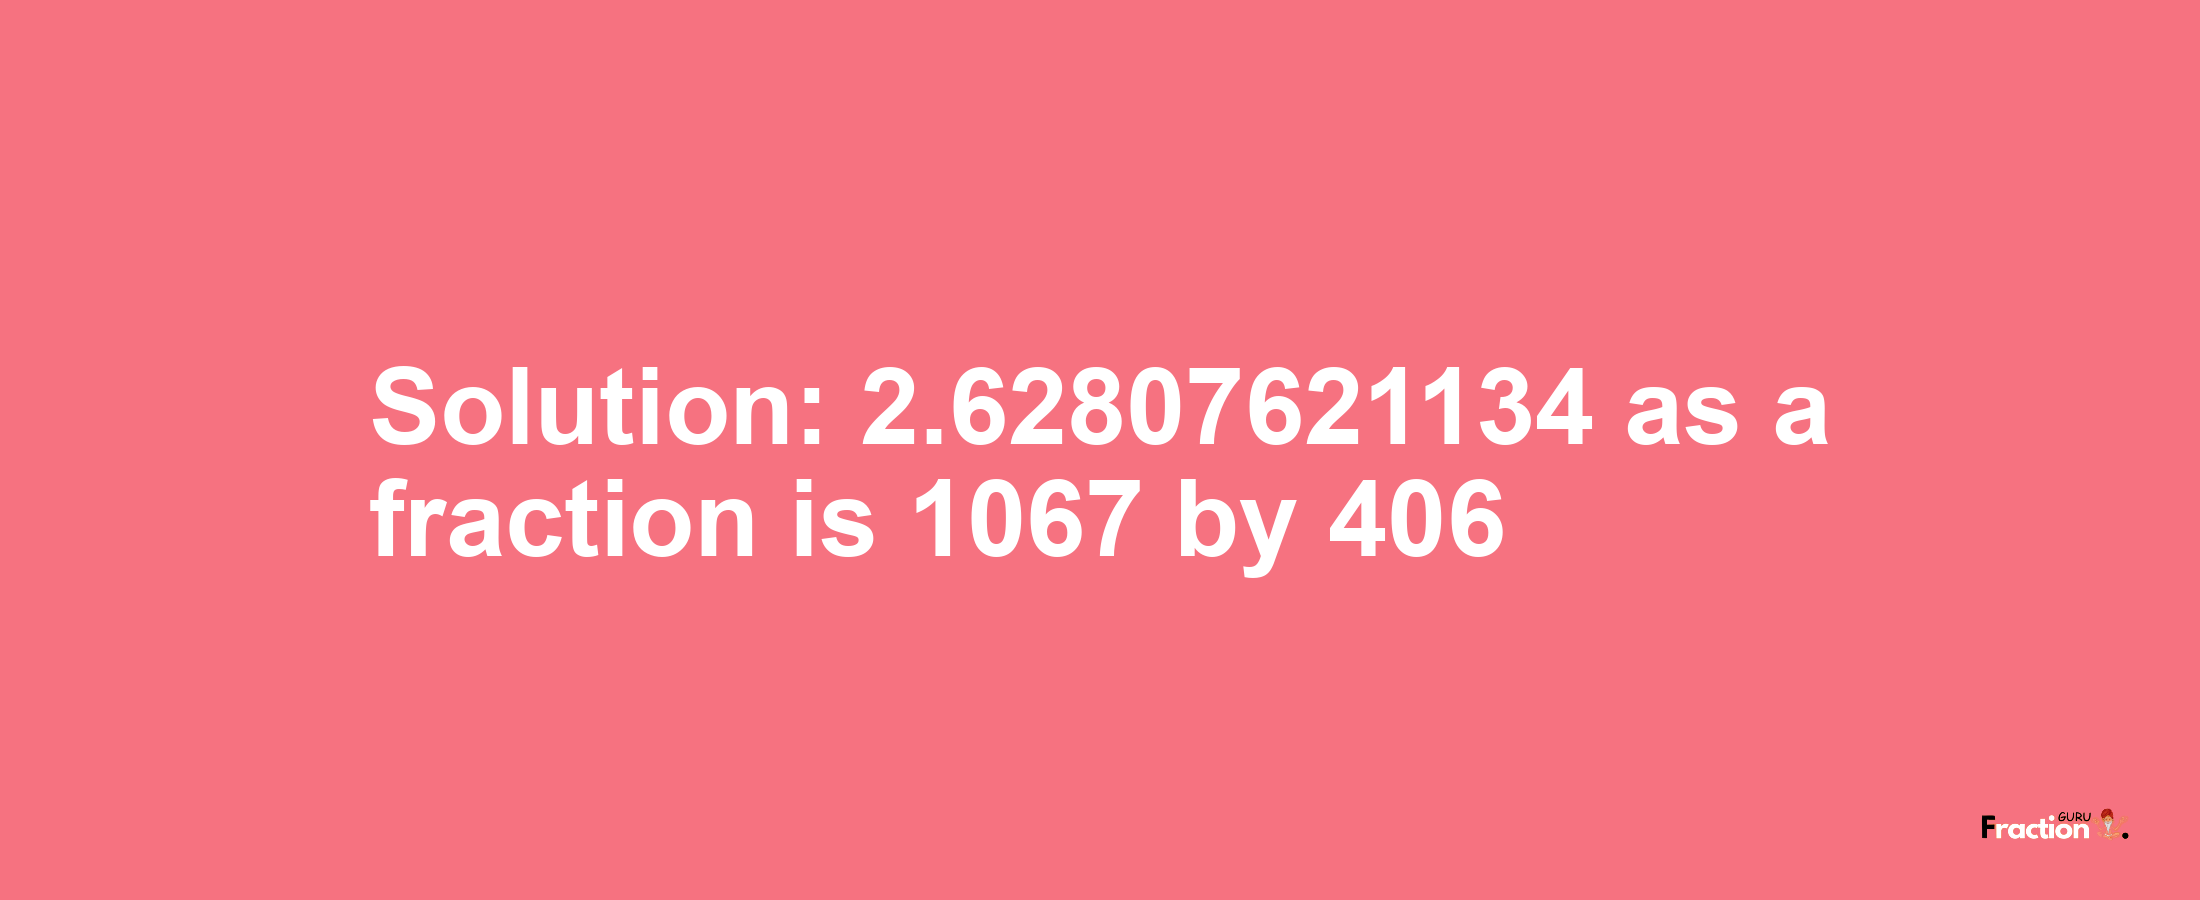 Solution:2.62807621134 as a fraction is 1067/406